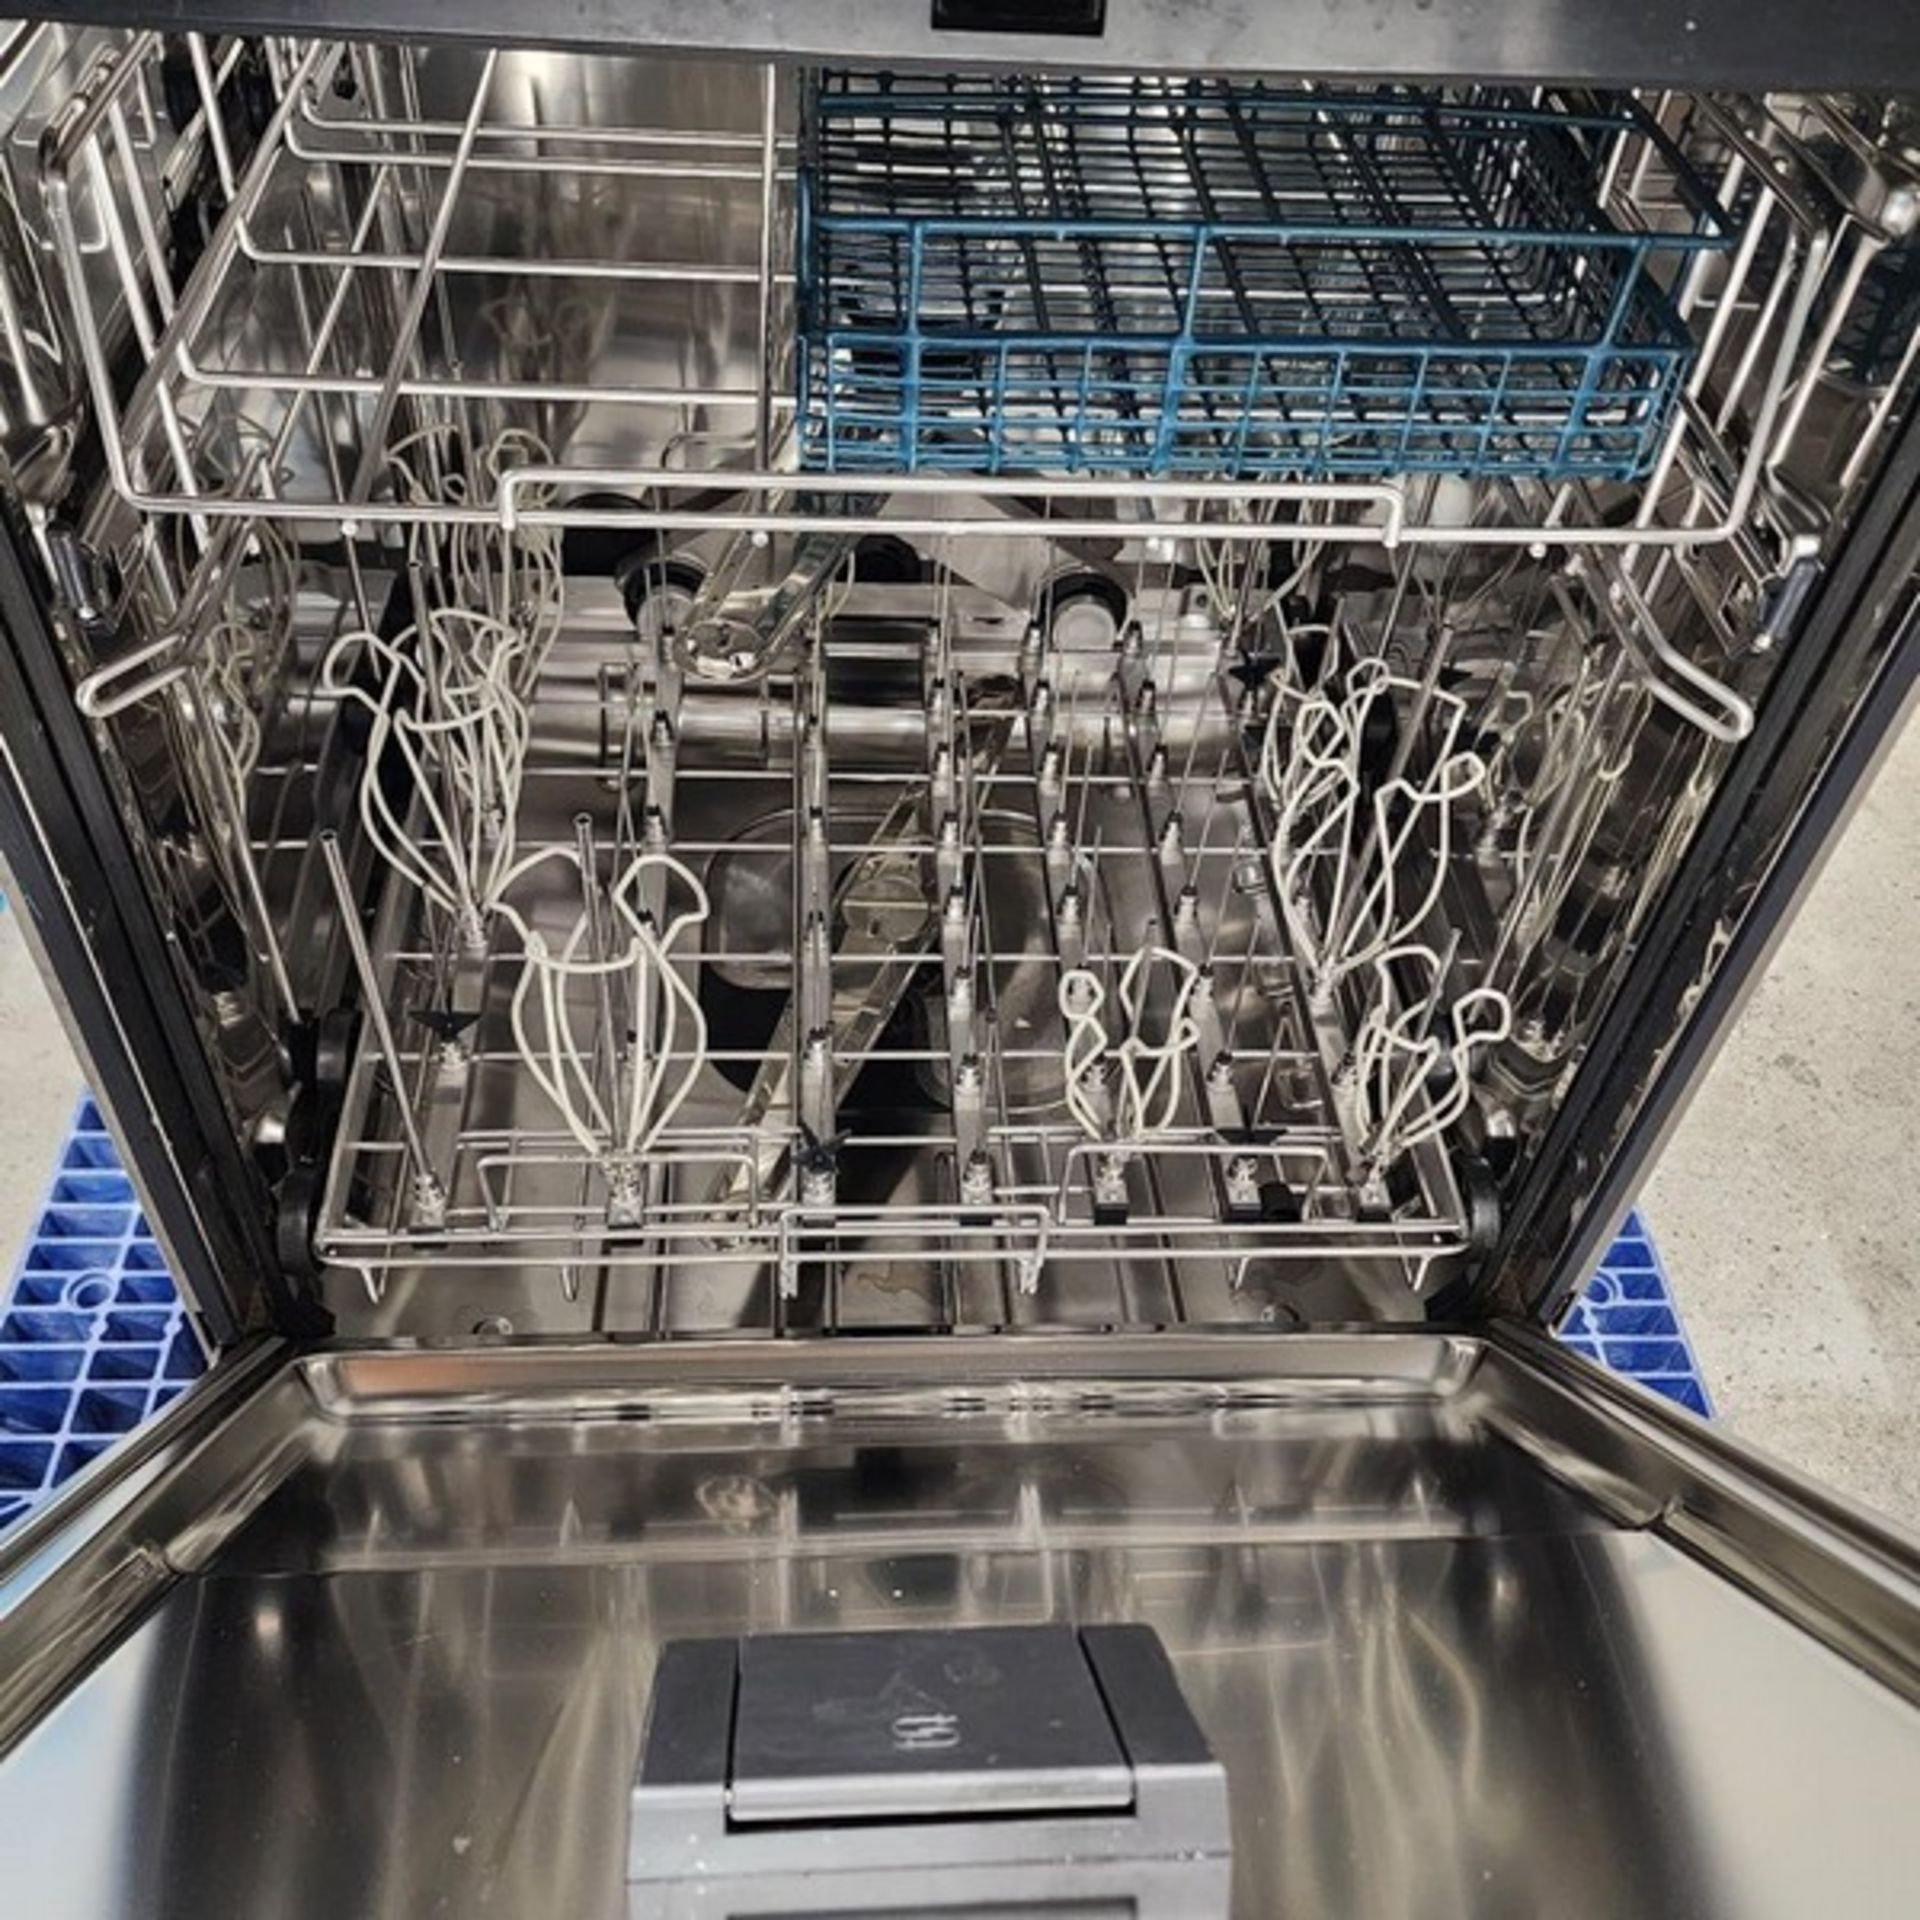 Miele Commercial Dishwasher high-quality Model PG 8583. Electric specifications: 208 volts, 60hz, - Image 5 of 7